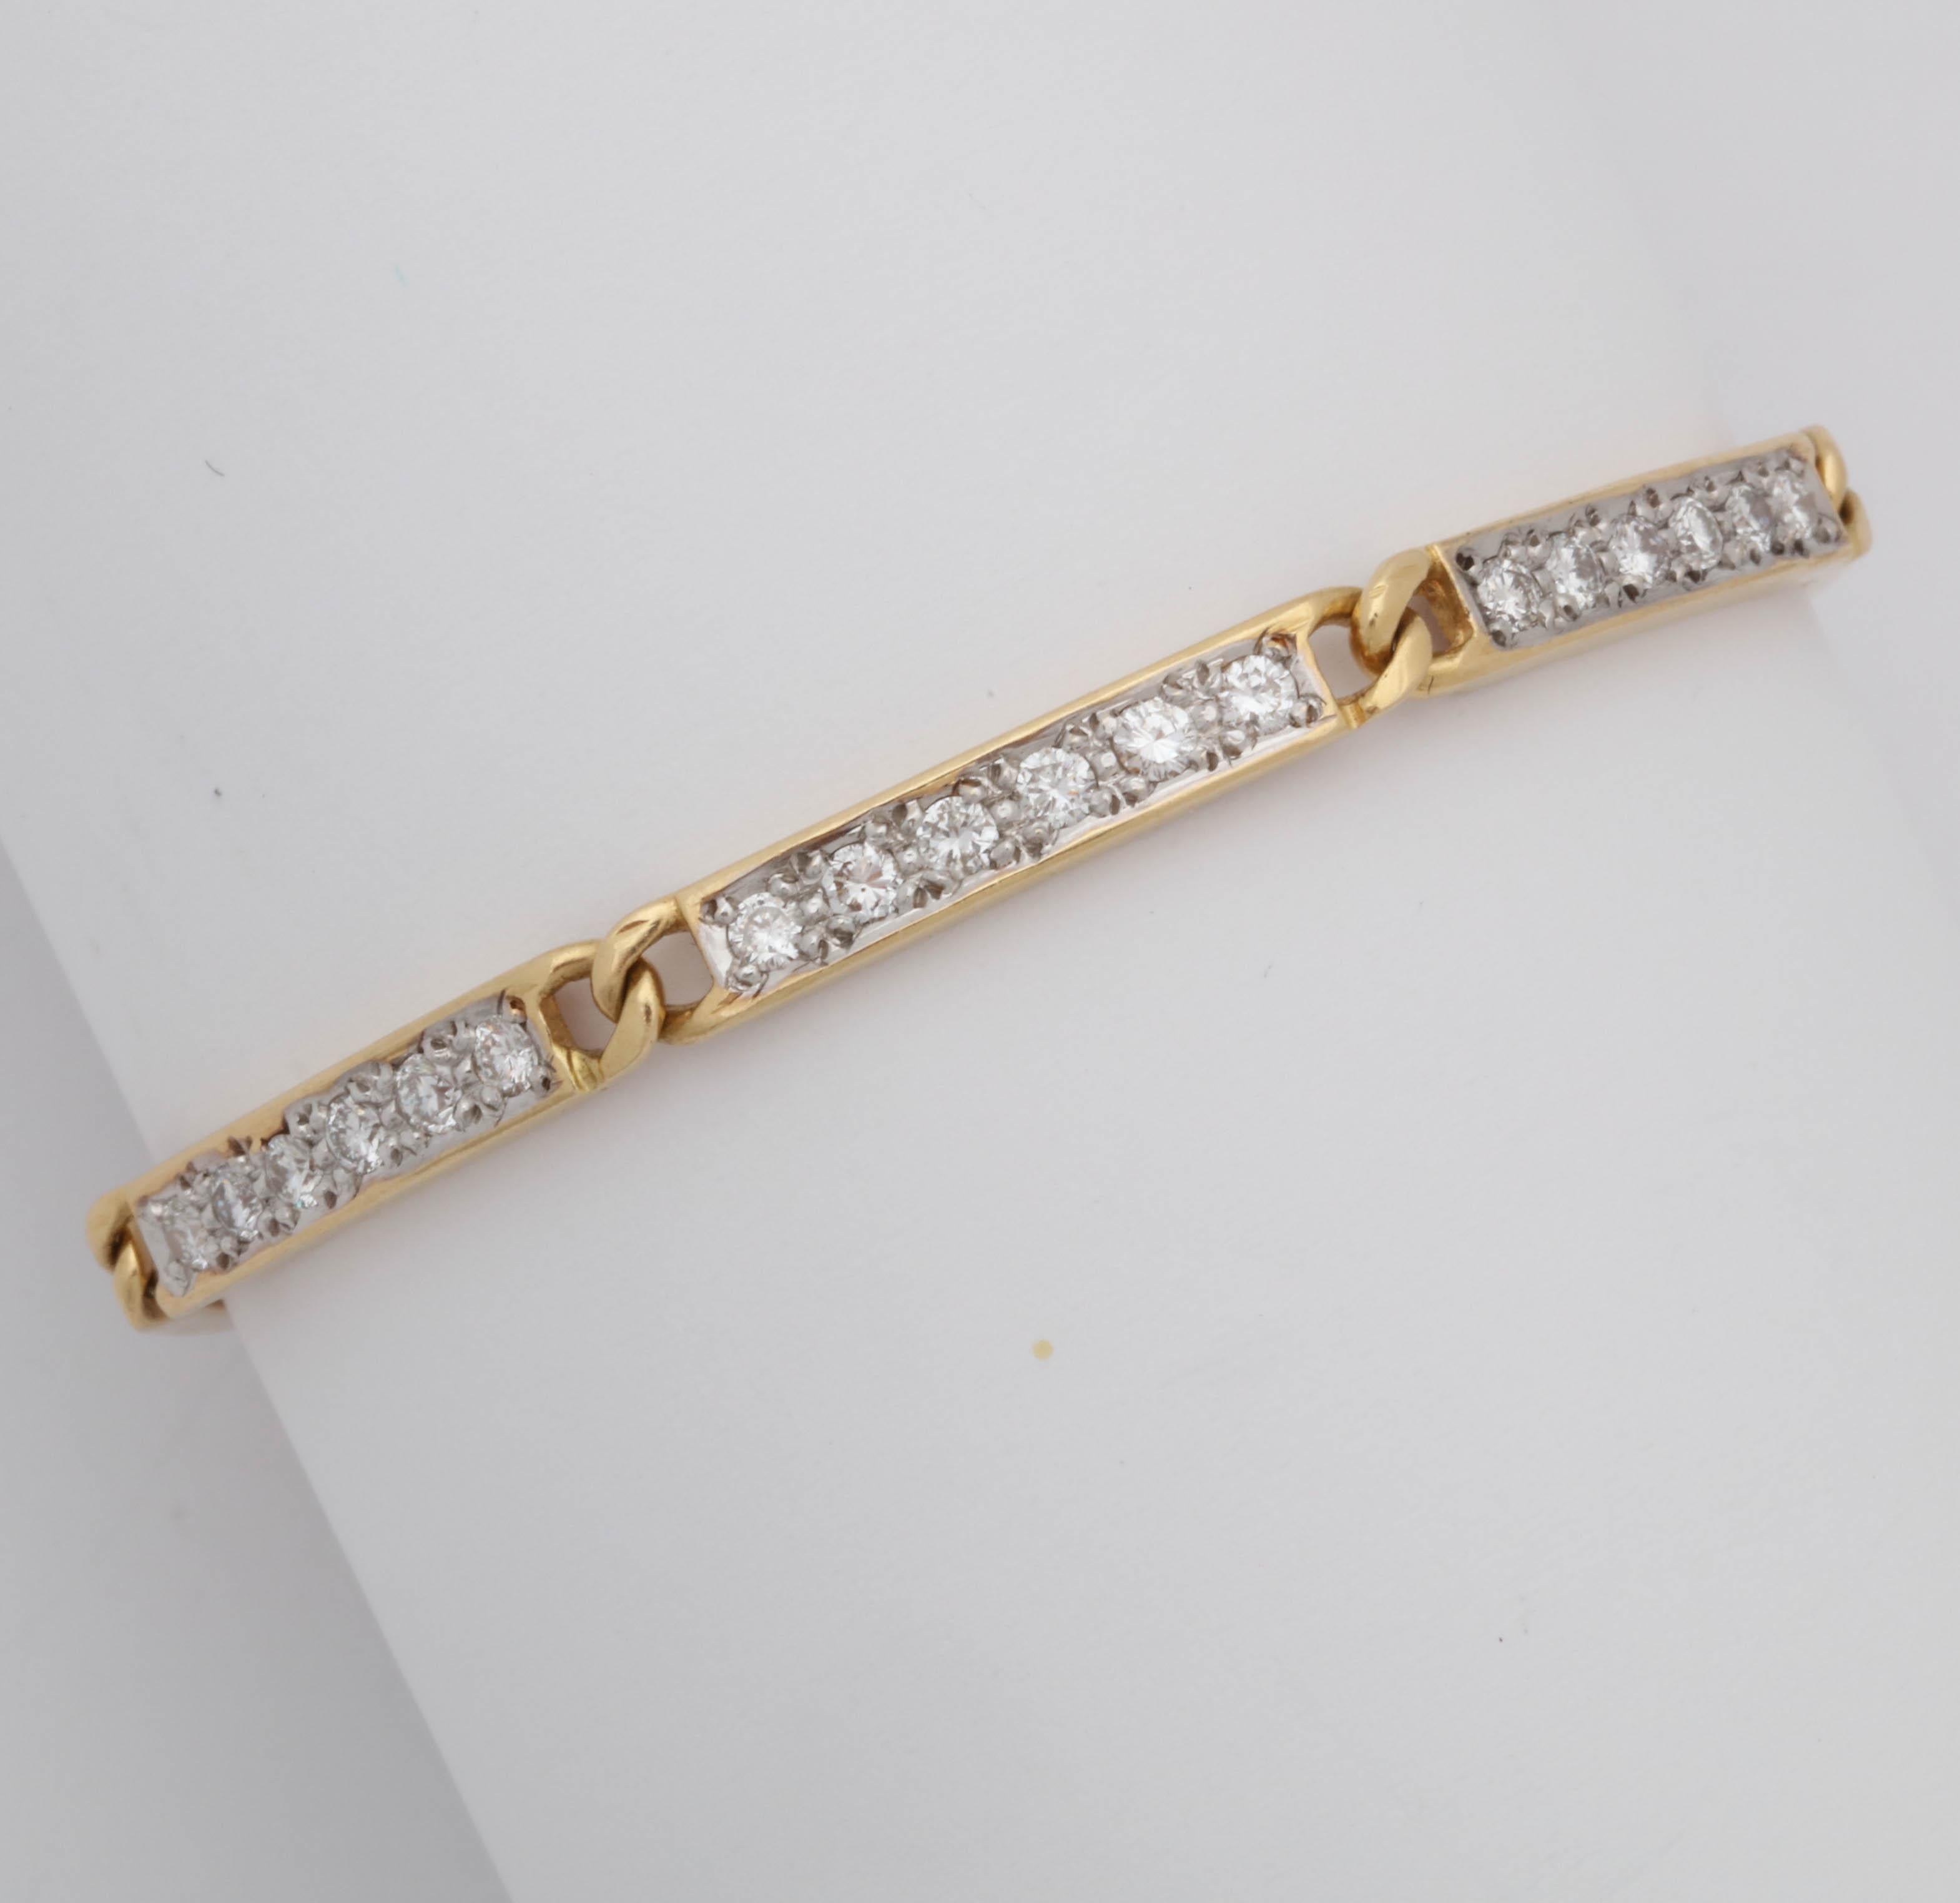 One Ladies 18kt Yellow Gold Flexible Straightline Link Bracelet Composed Of Seven Panels Of High Quality Full Cut Diamonds Weighing Approximately 3 Carats Total Weight. All Diamonds Are Bead Set With Four Beads Holding Each Diamond.Figure 